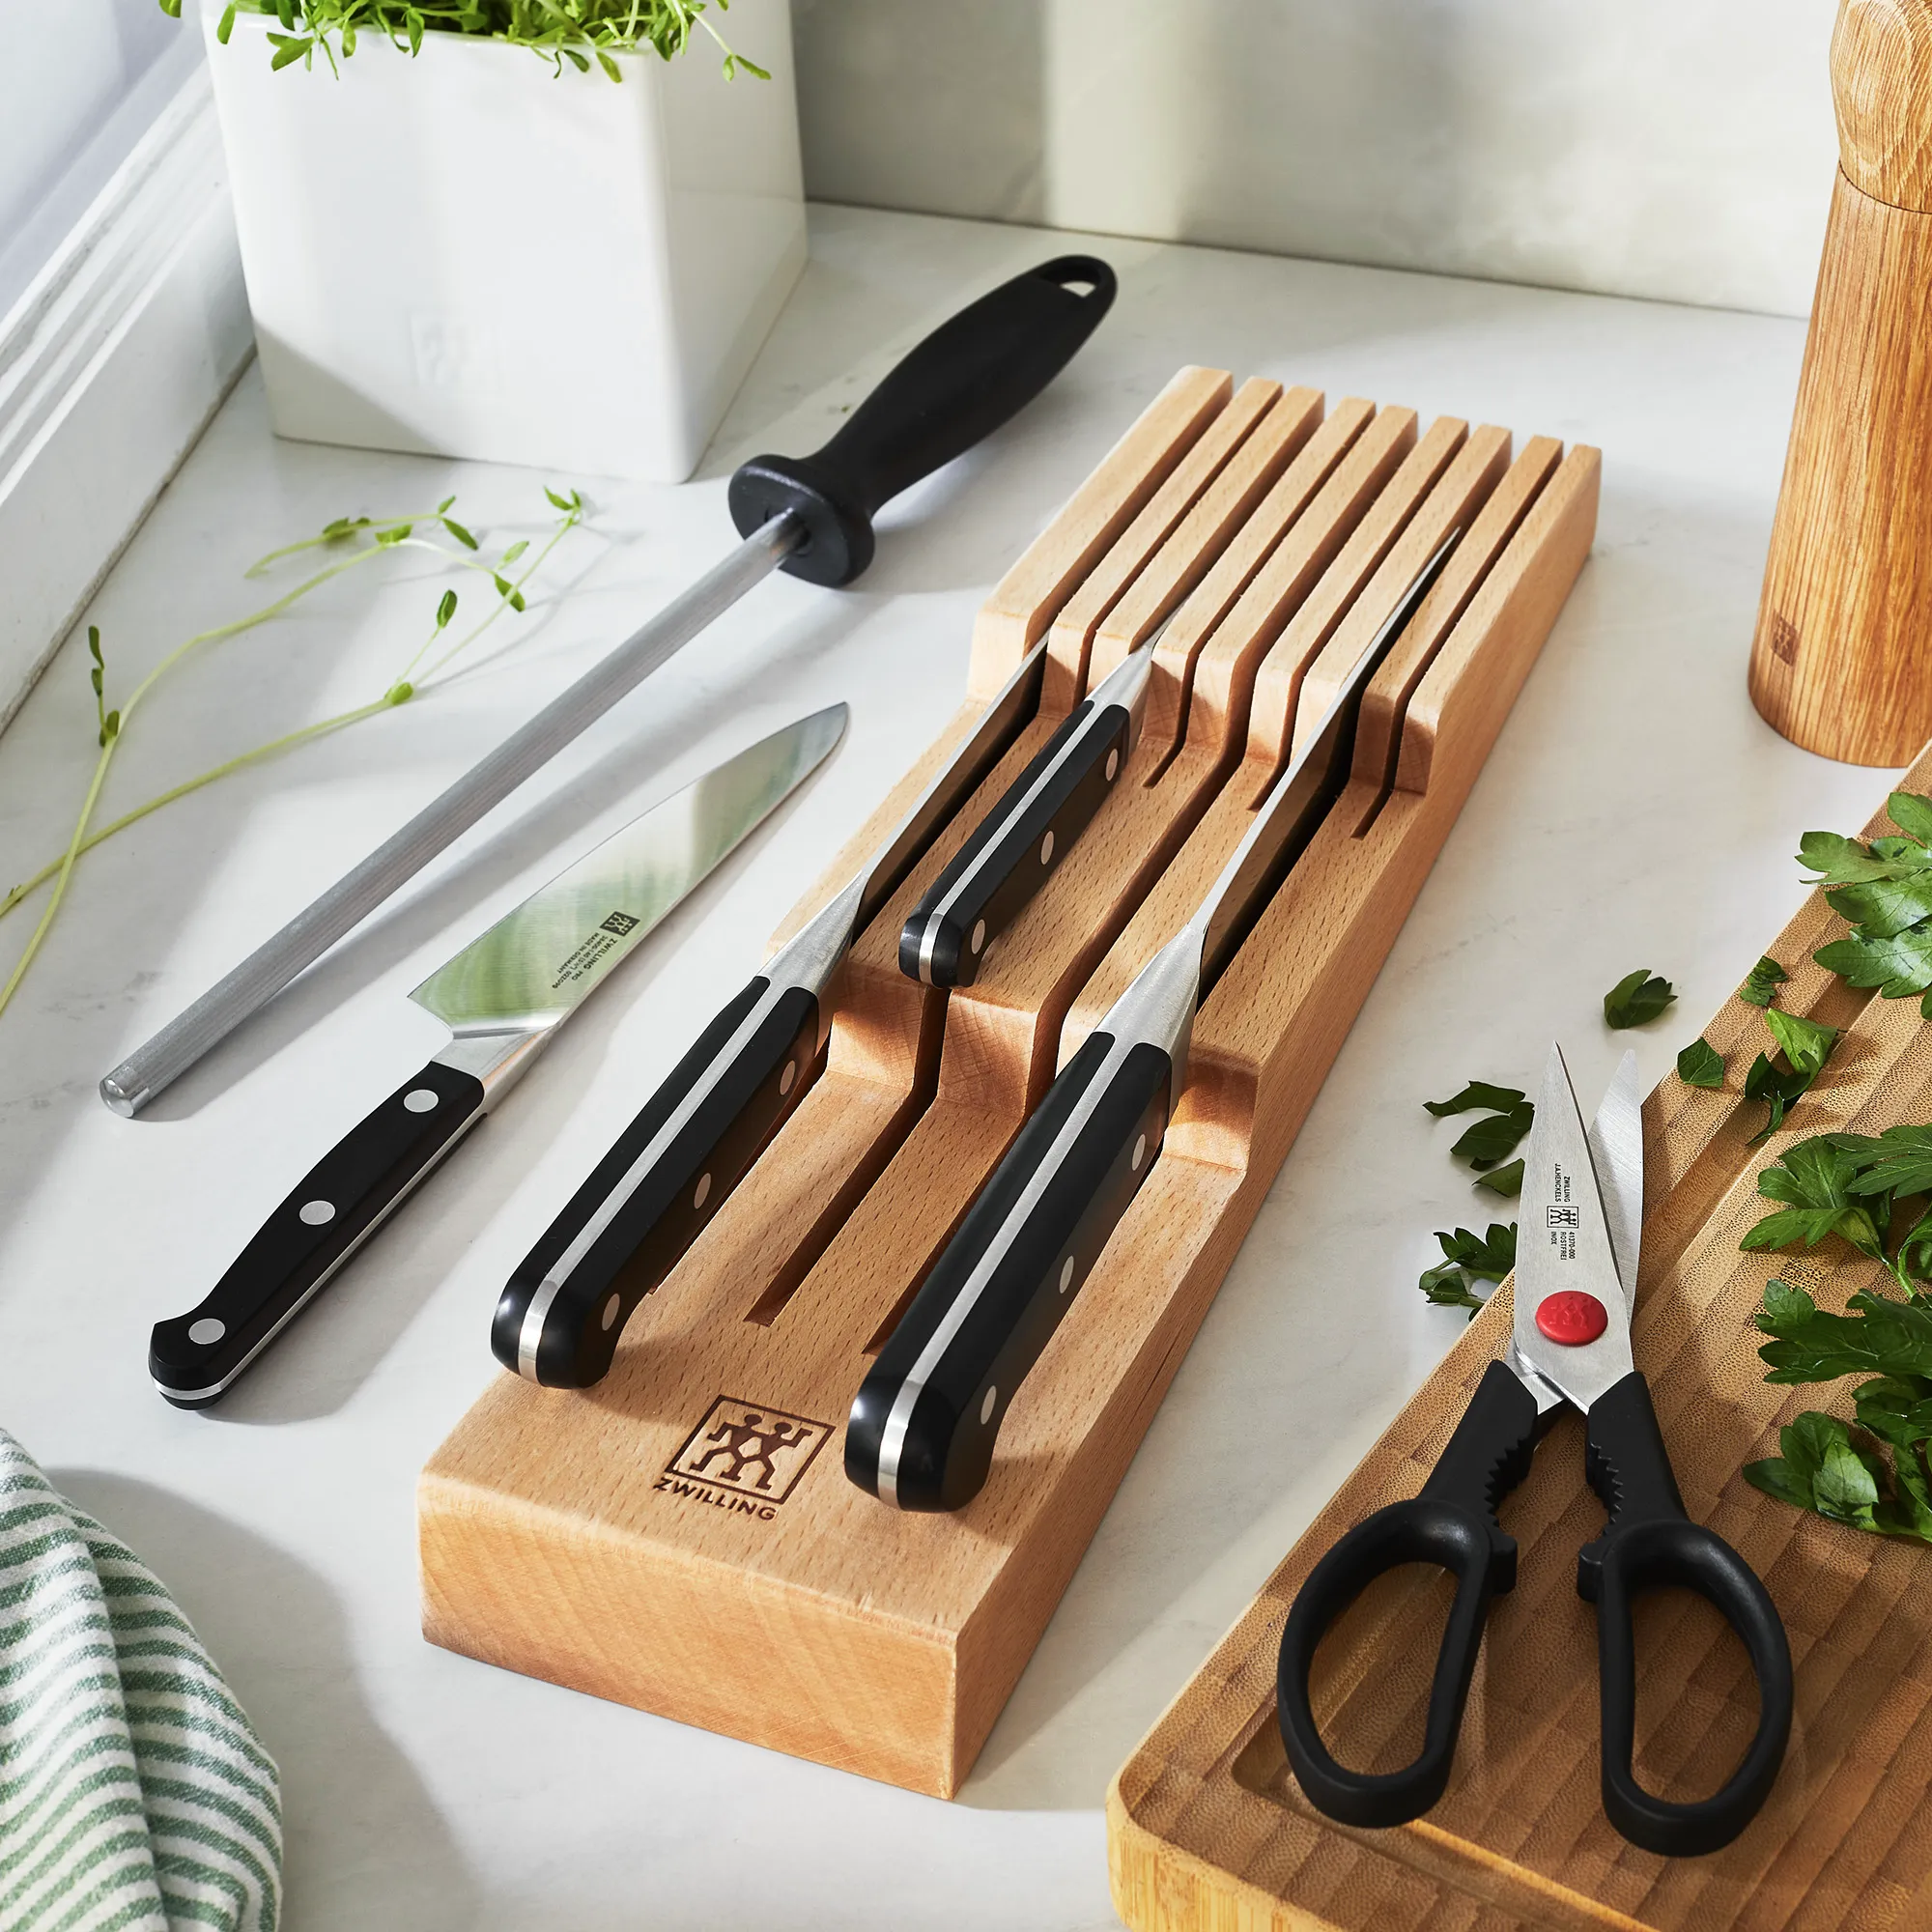 https://www.homethreads.com/files/zwilling/38449-004-zwilling-pro-7-pc-knife-block-set-with-in-drawer-knife-tray-4.webp